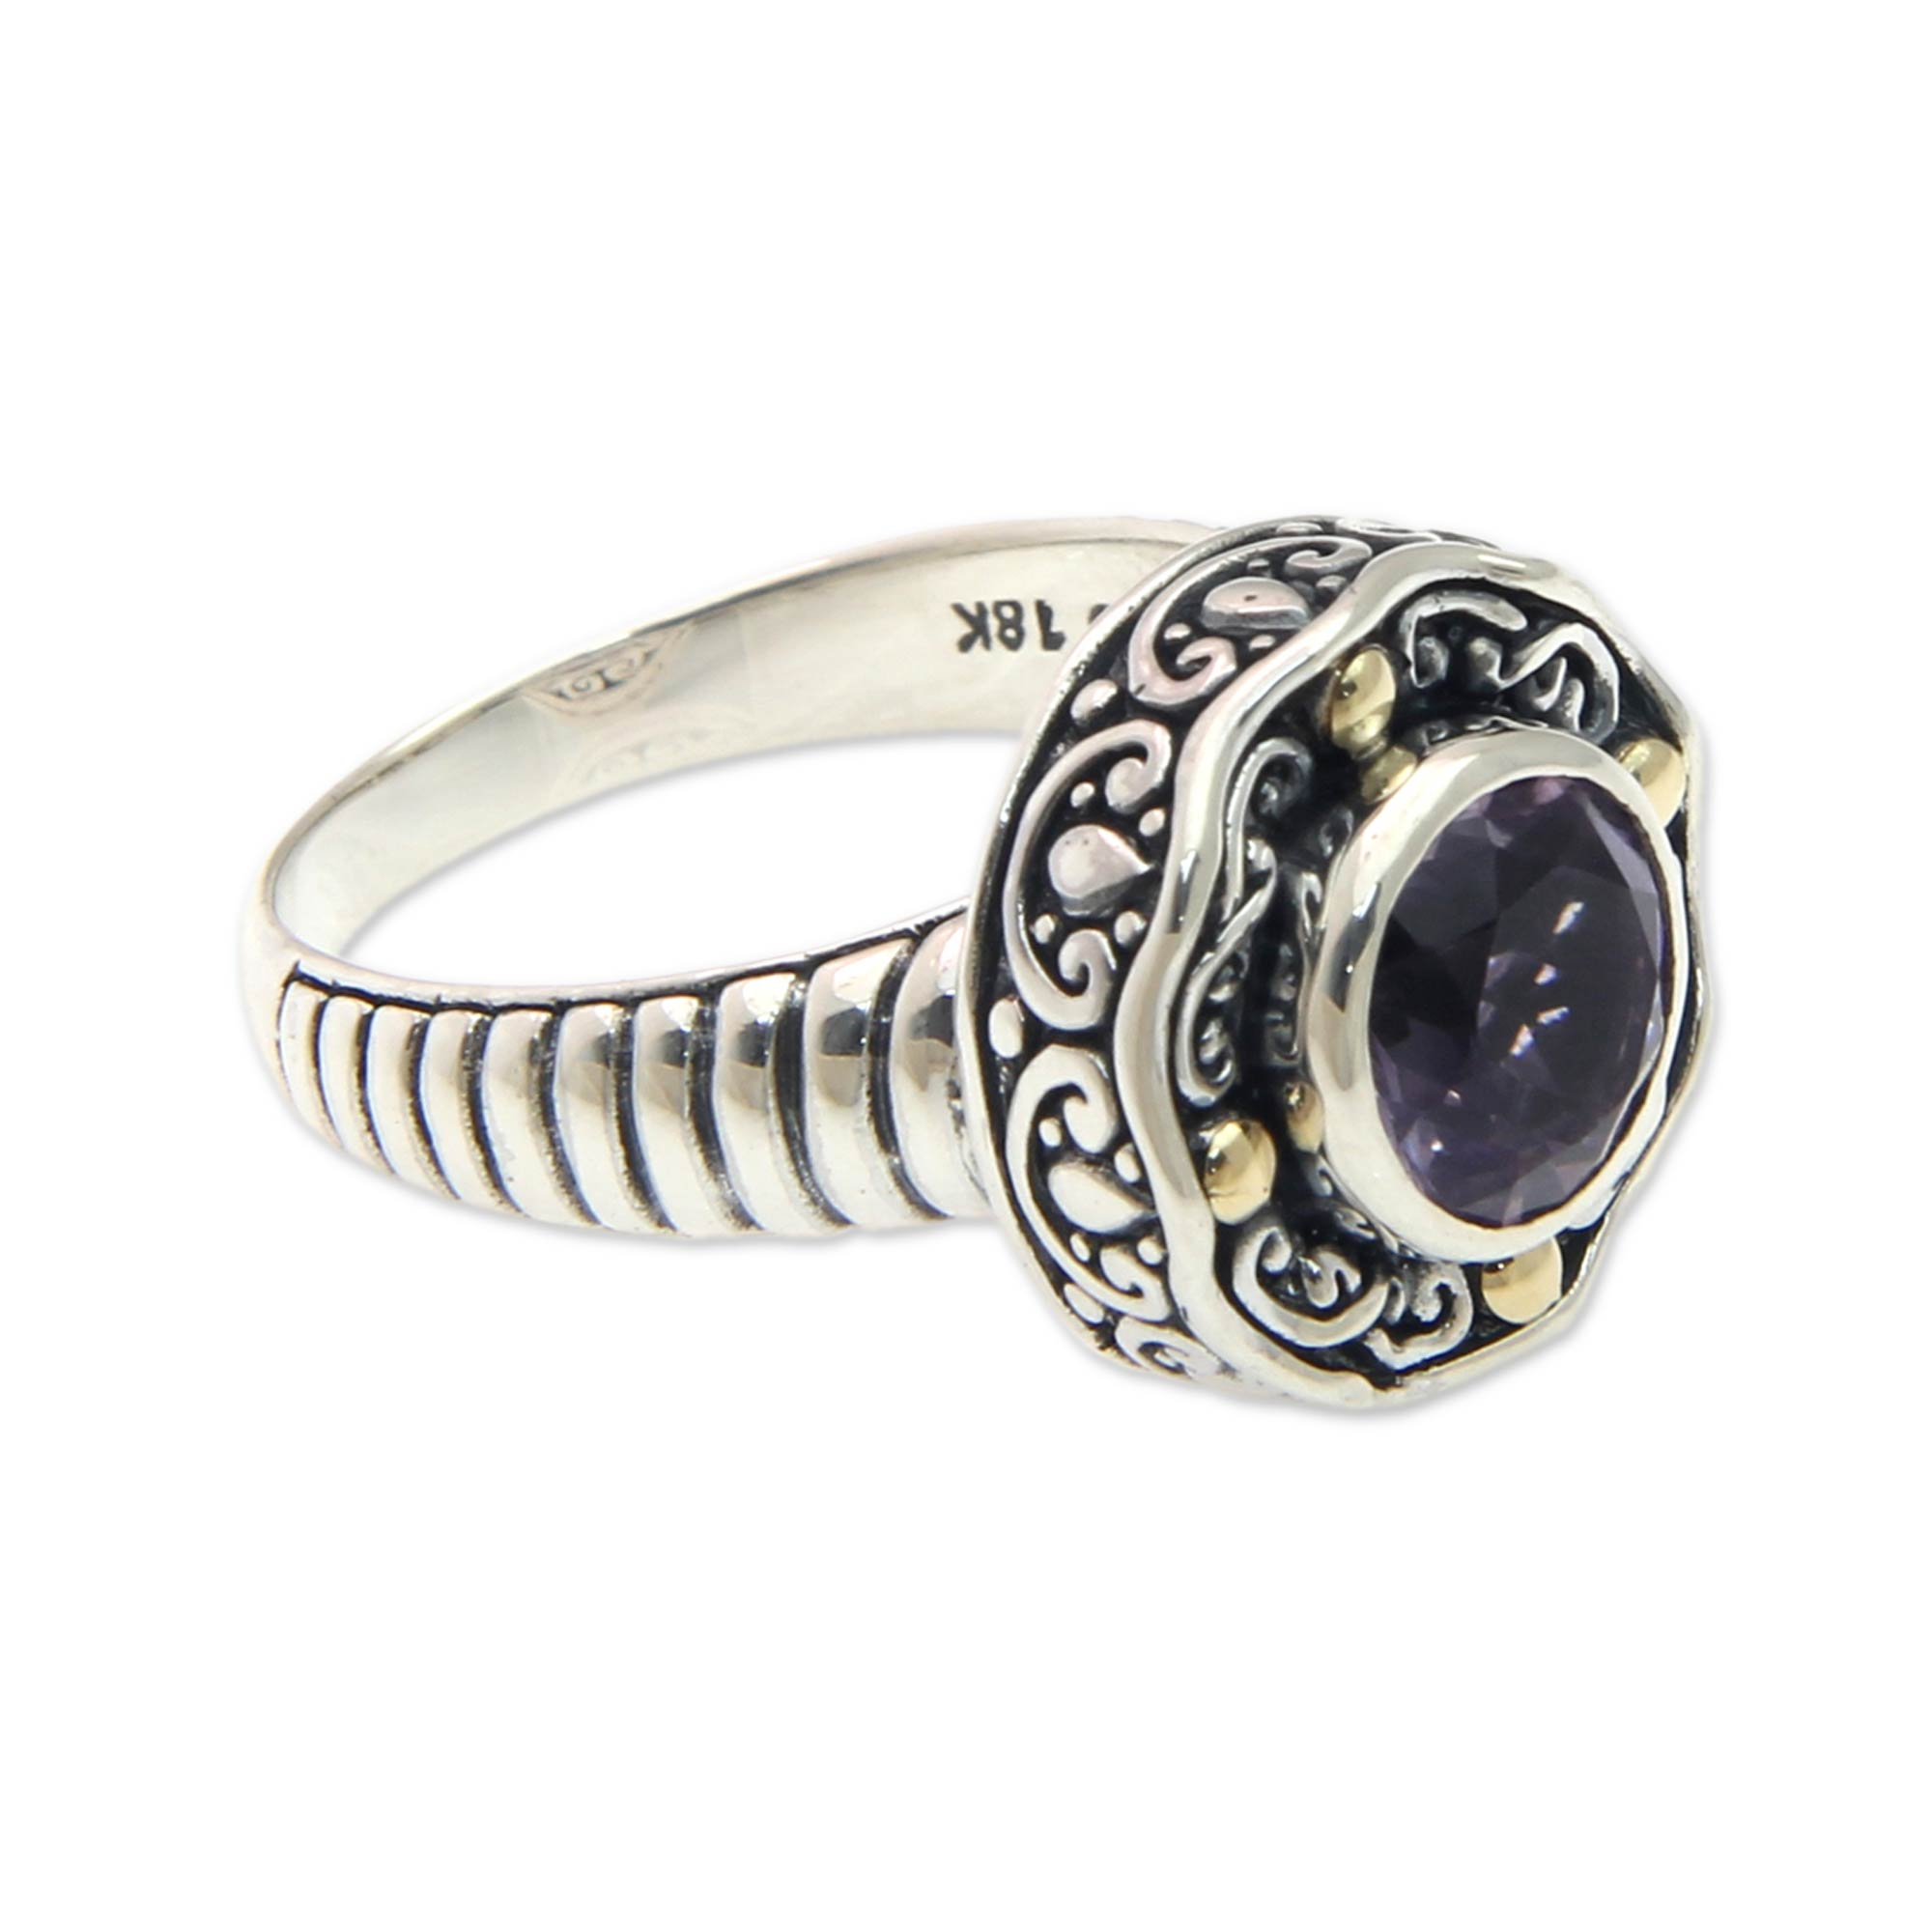 Handmade Balinese Cocktail Ring with Amethyst and 18k Gold - Kuta Lilac ...